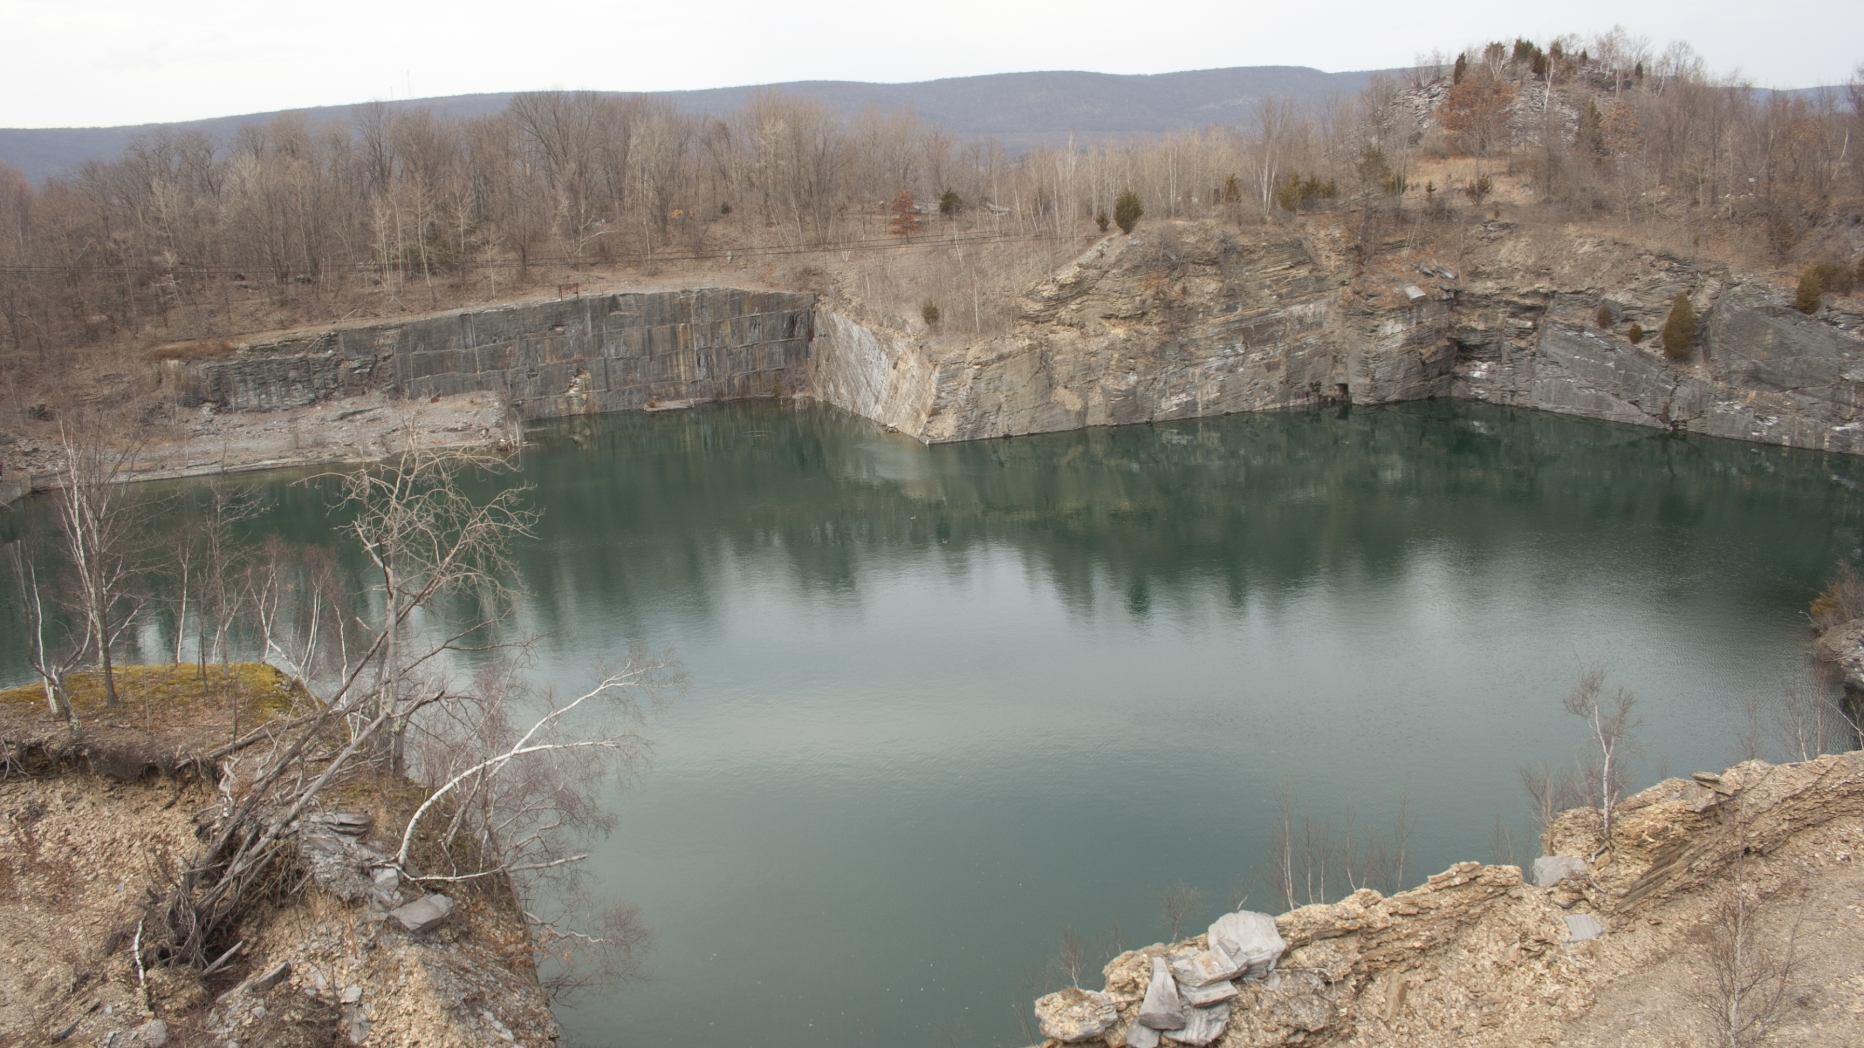 Abandoned quarry that has now turned in to a lake.